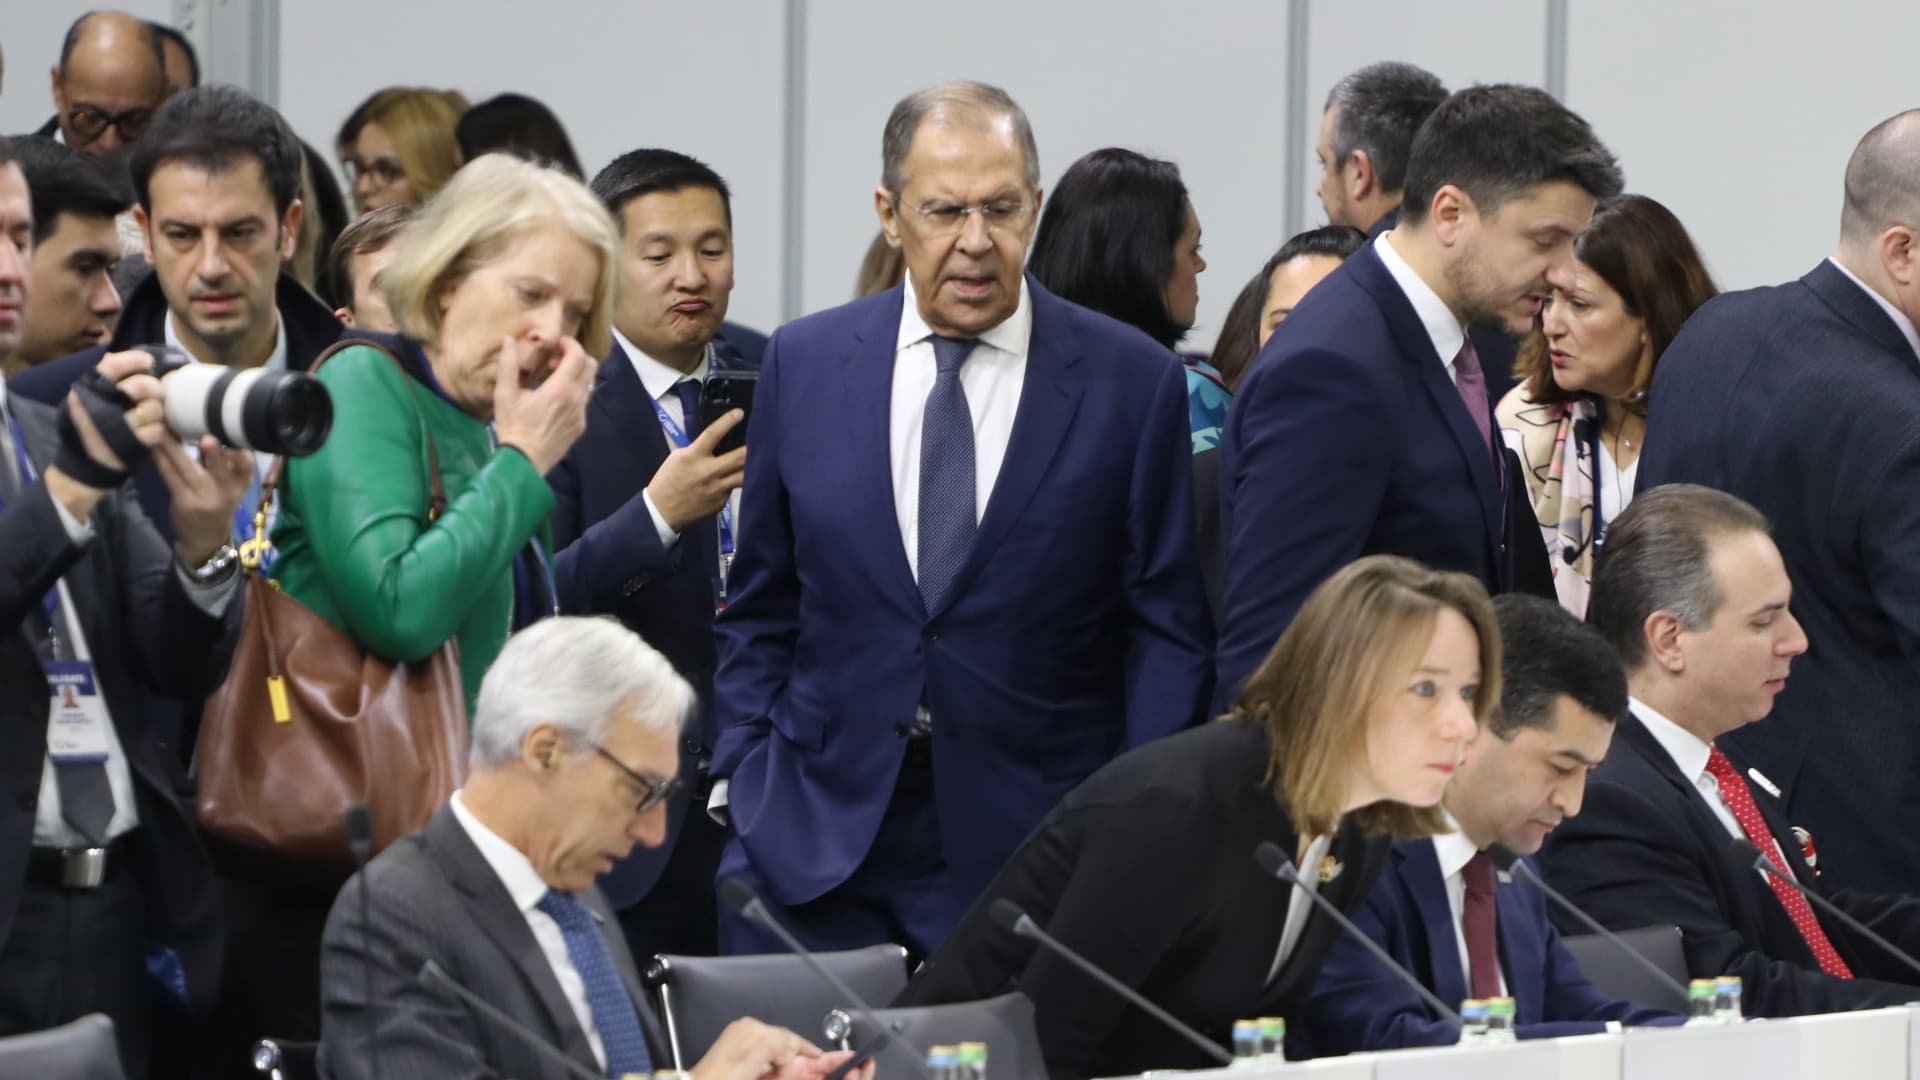 SKOPJE, NORTH MACEDONIA - NOVEMBER 30: Russian Foreign Minister Sergey Lavrov attends the 30th Ministerial Council of the Organization for Security and Co-operation in Europe (OSCE) in Skopje, North Macedonia on November 30, 2023. (Photo by Umeys Sulejman/Anadolu via Getty Images)